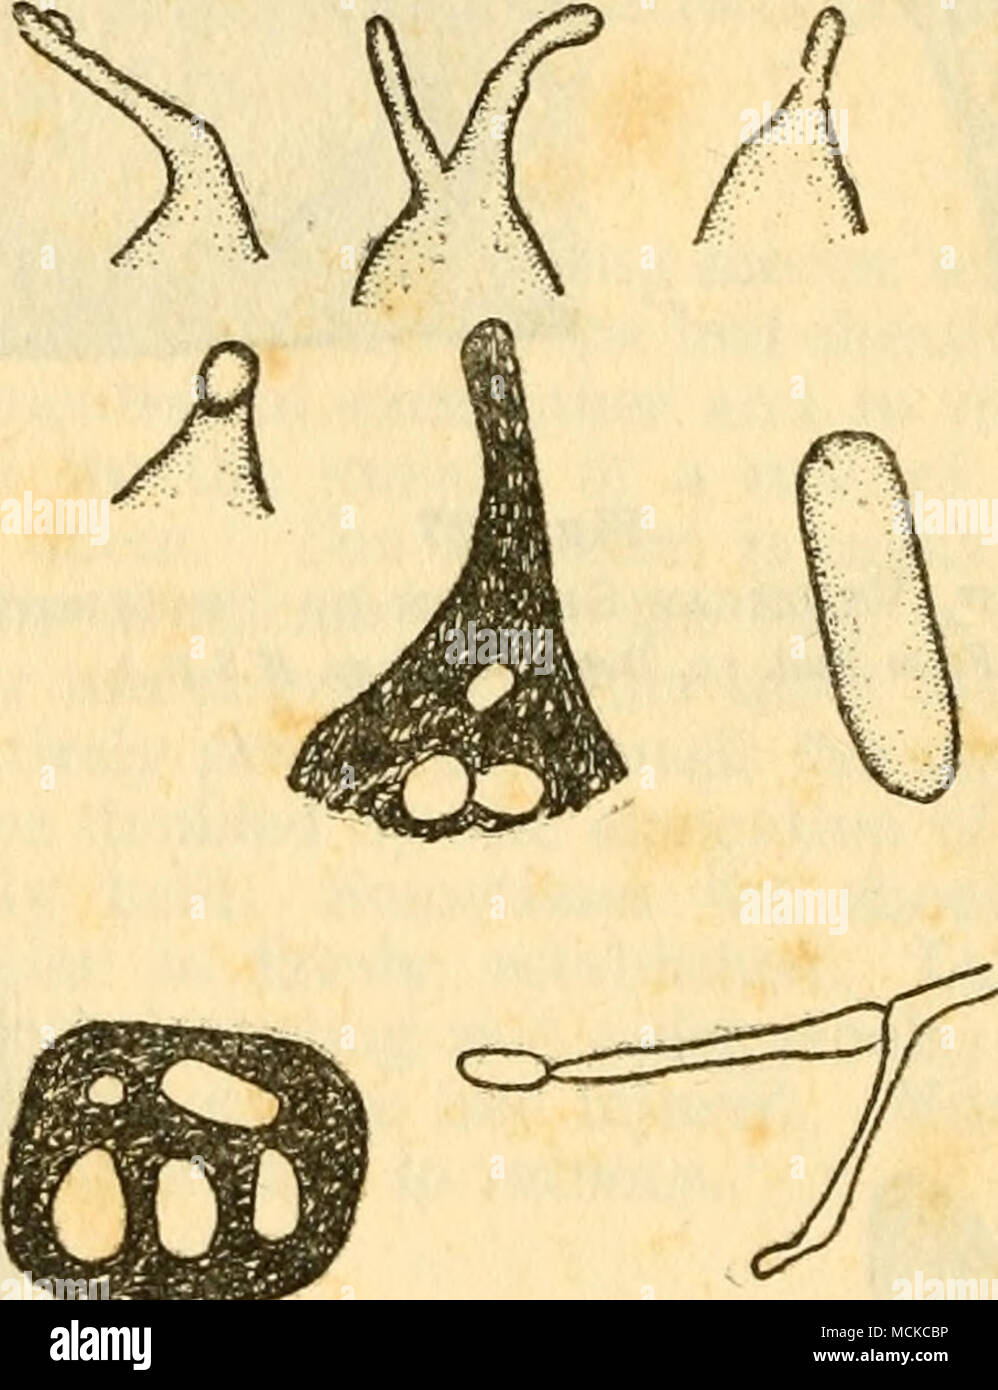 . Fig. 129 Cytospora Sacchari : Surface and Sectional Views of Pycnidia Spore and Sporophore From Memoirs, Dept. Agri., India project beyond the surface sufficiently to be readily seen, and to give a rough sensation when the linger is passed over them. During wet weather a minute yellowish globule of conidia exudes from the tip of the beak. The spores are cylindrical and slightly curved, obtuse at both ends, 3.5x1-1.5 microns. With the elimination of the susceptible varieties in Porto Rico no further evidence of parasitic activity on the part of this fungus has been seen. Leaf Sheath Rot Under Stock Photo